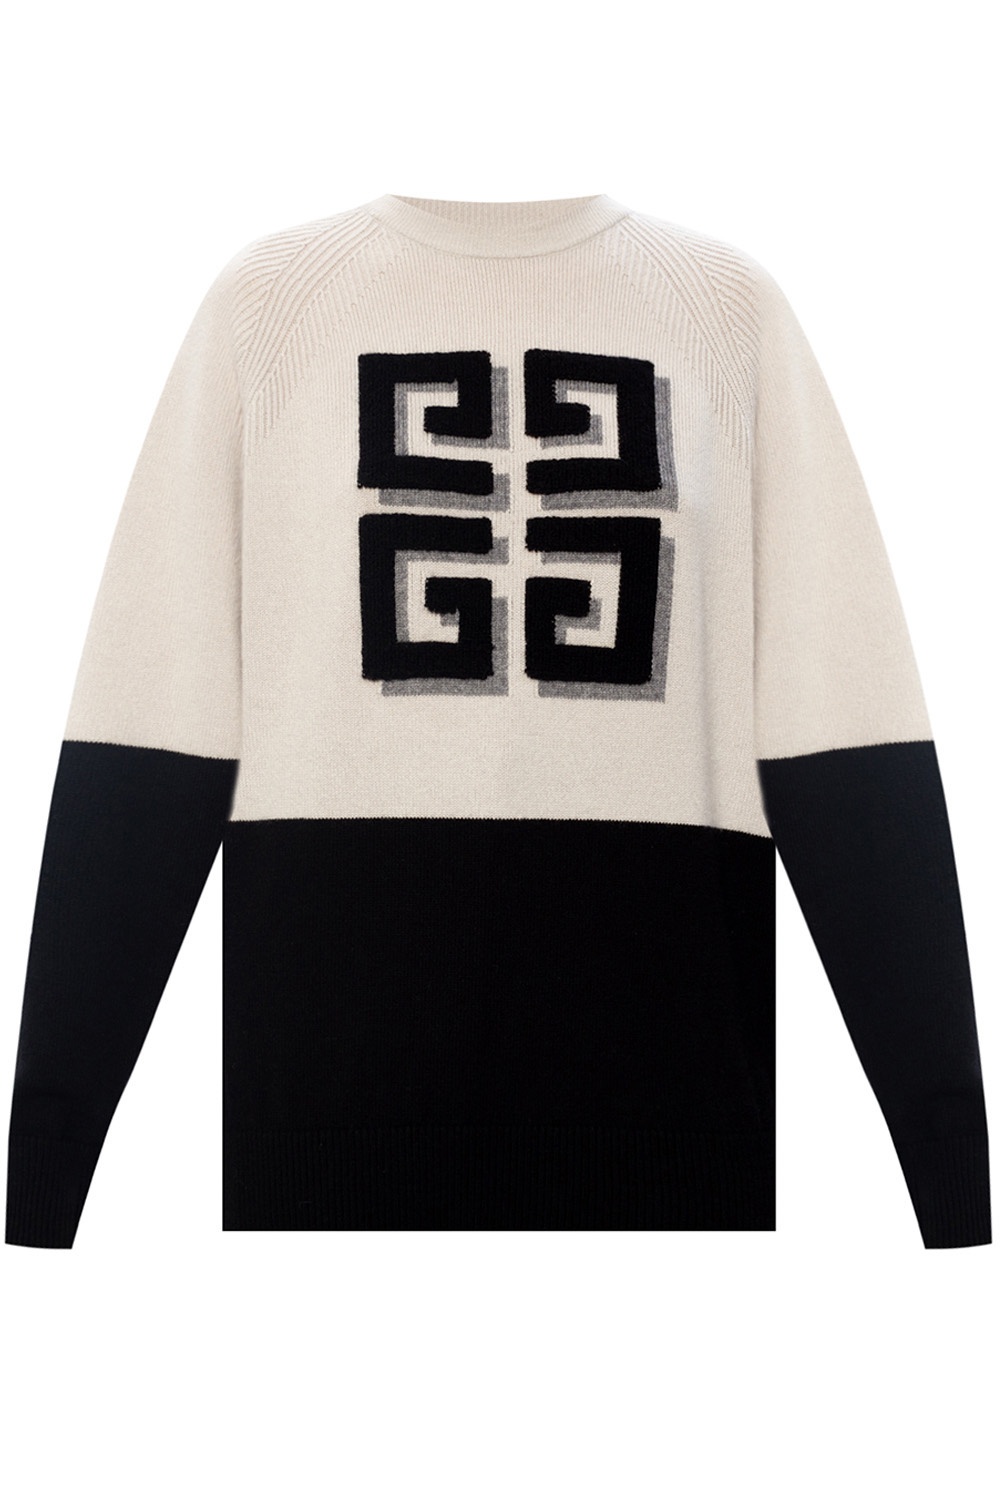 givenchy cashmere sweater